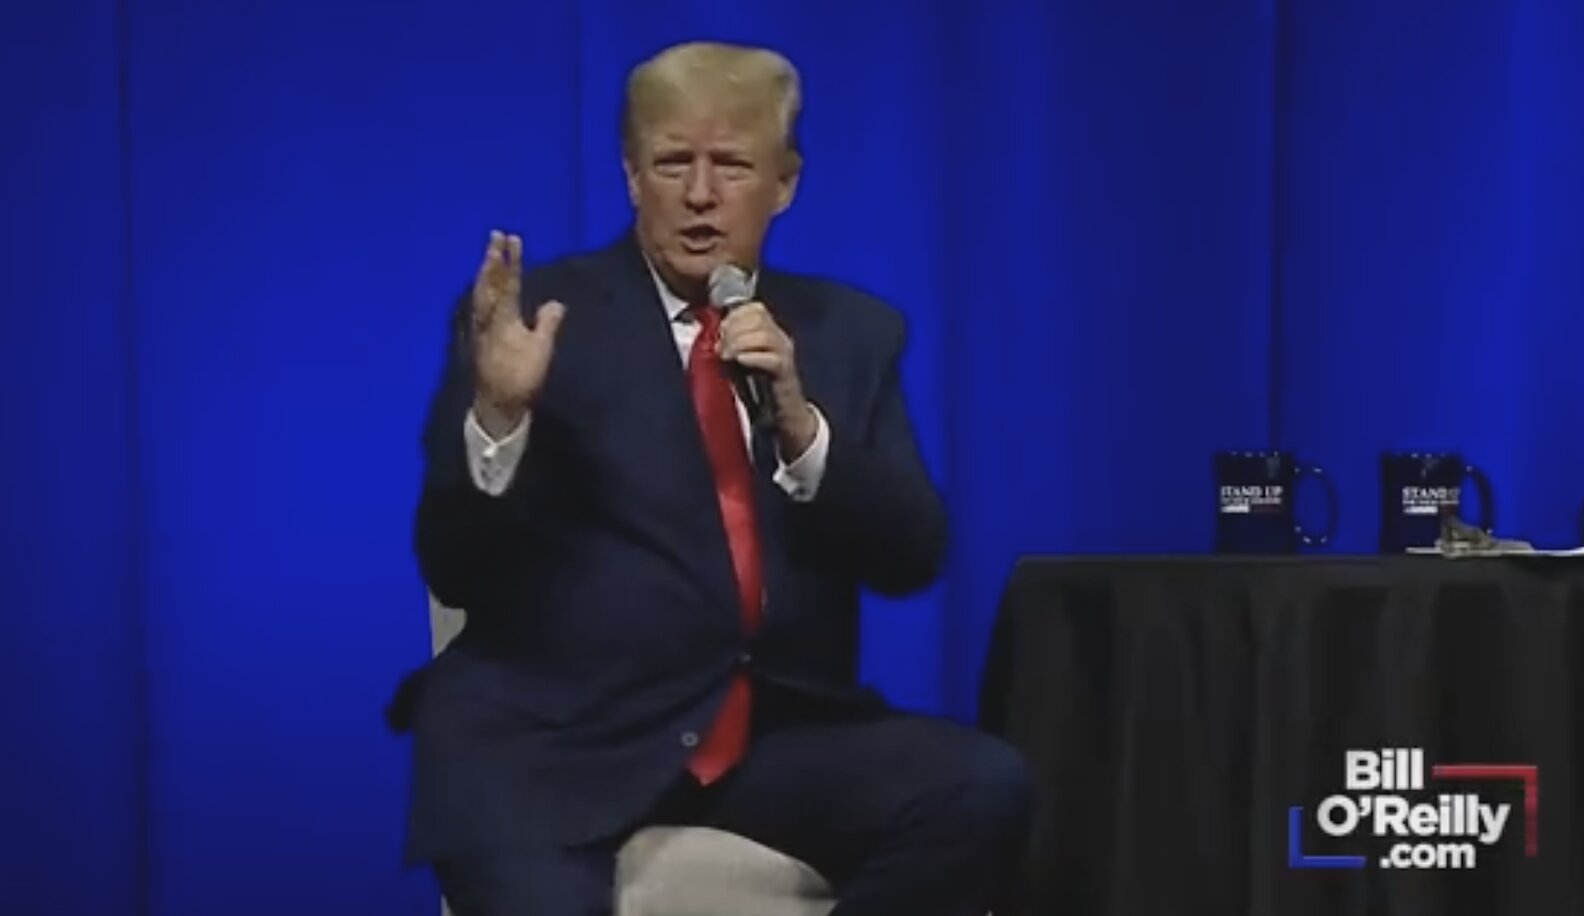 Trump booed for saying he wouldn’t investigate Hunter Biden: ‘I don’t want to hurt a family’